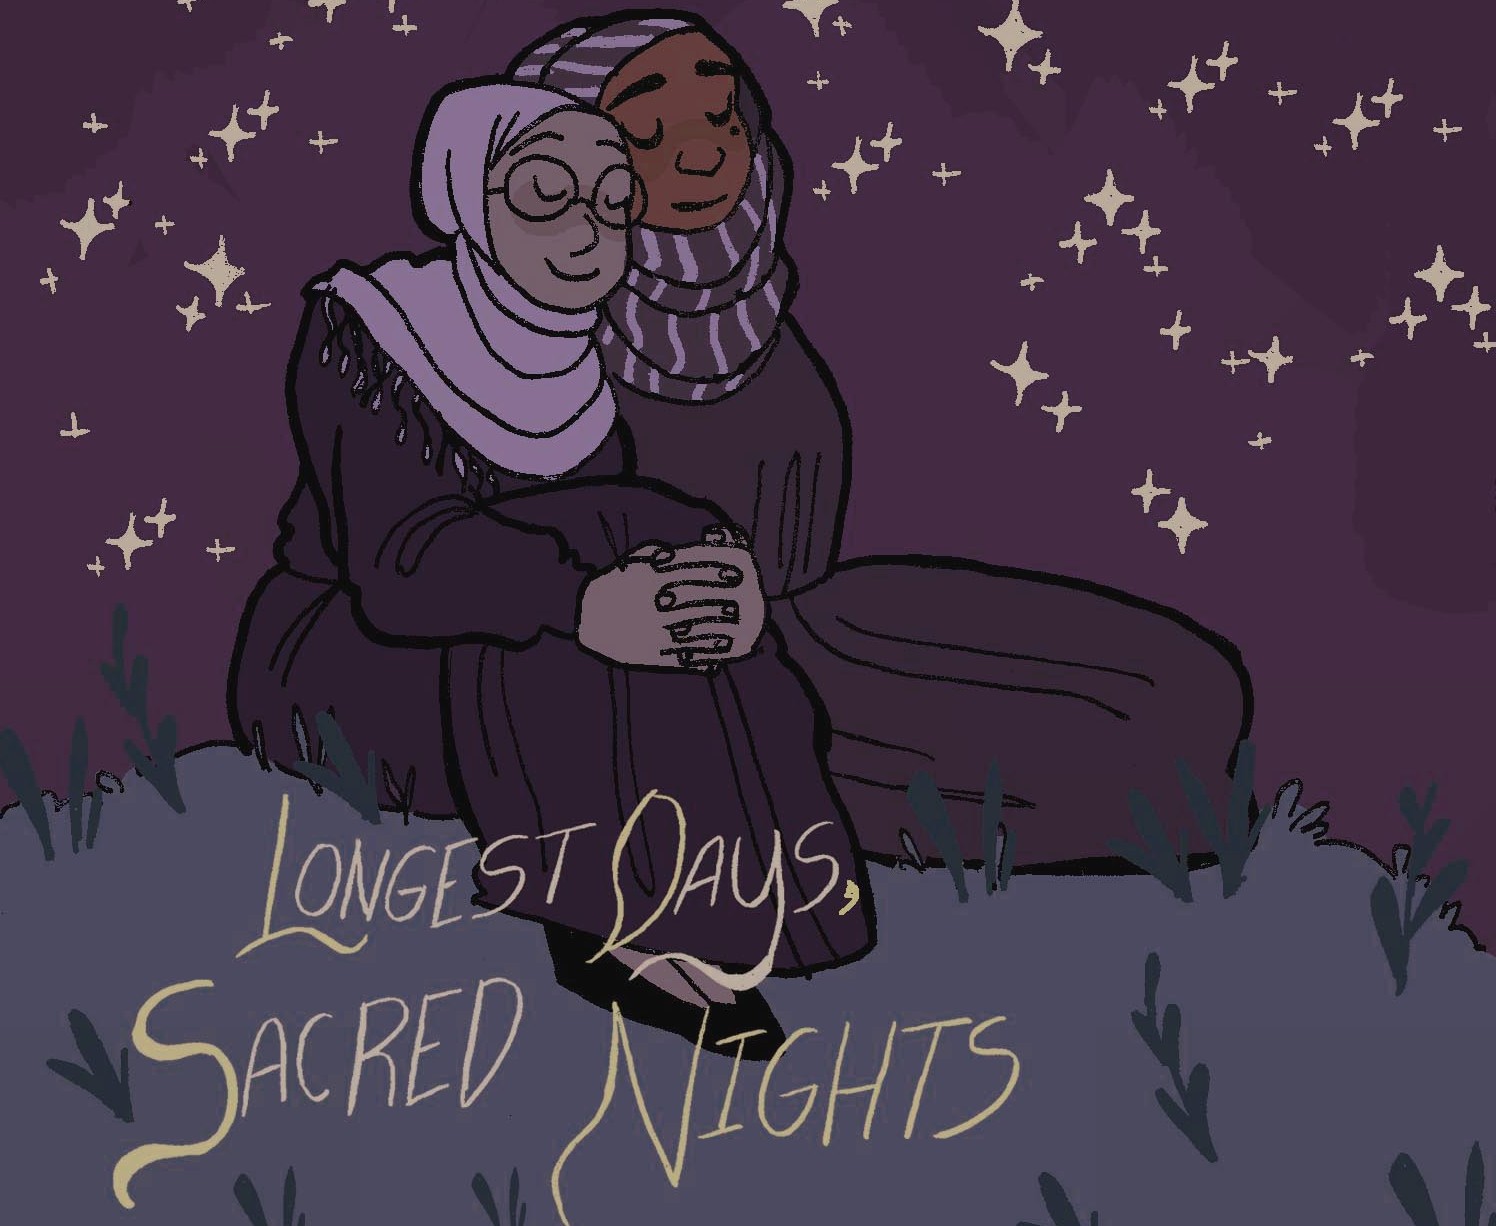 An animated rendering of two women wearing head scarves leaning contentedly against each other on a hilltop. It is nighttime and there is a crescent moon in the sky. The phrase Longest Days, Sacred Nights is written in the bottom of the frame.